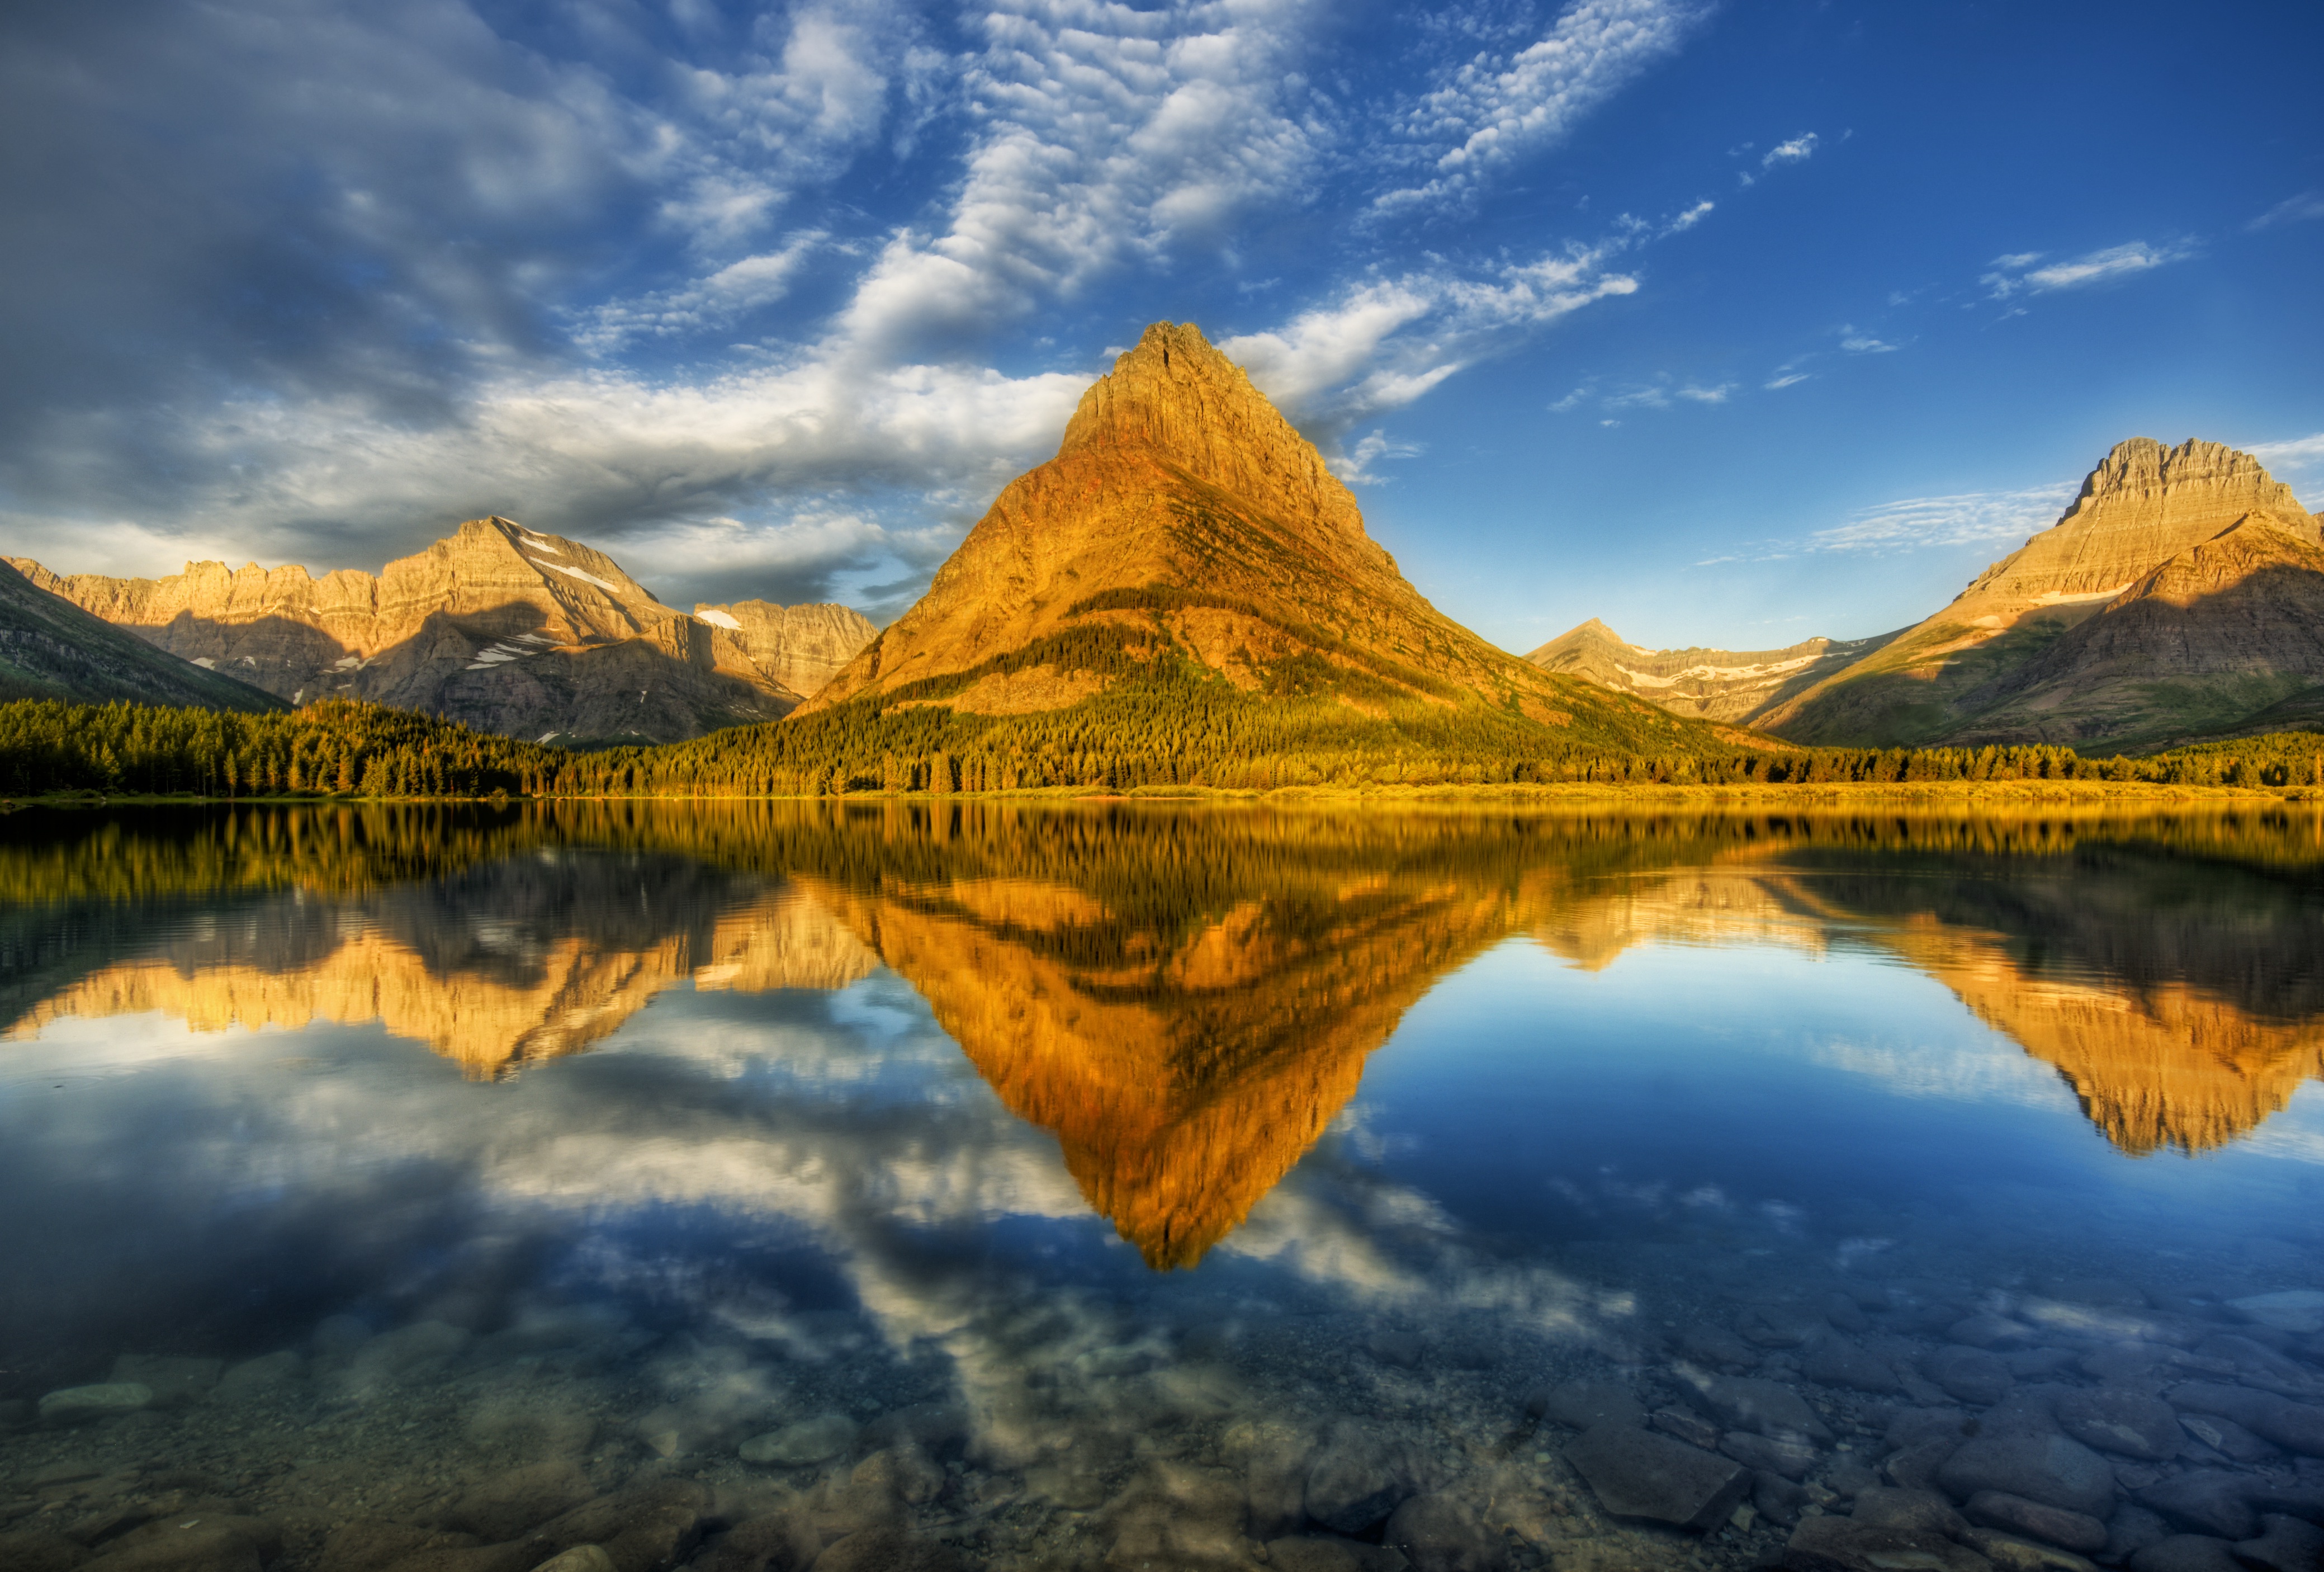 50 Beautiful Landscape Photography Pictures